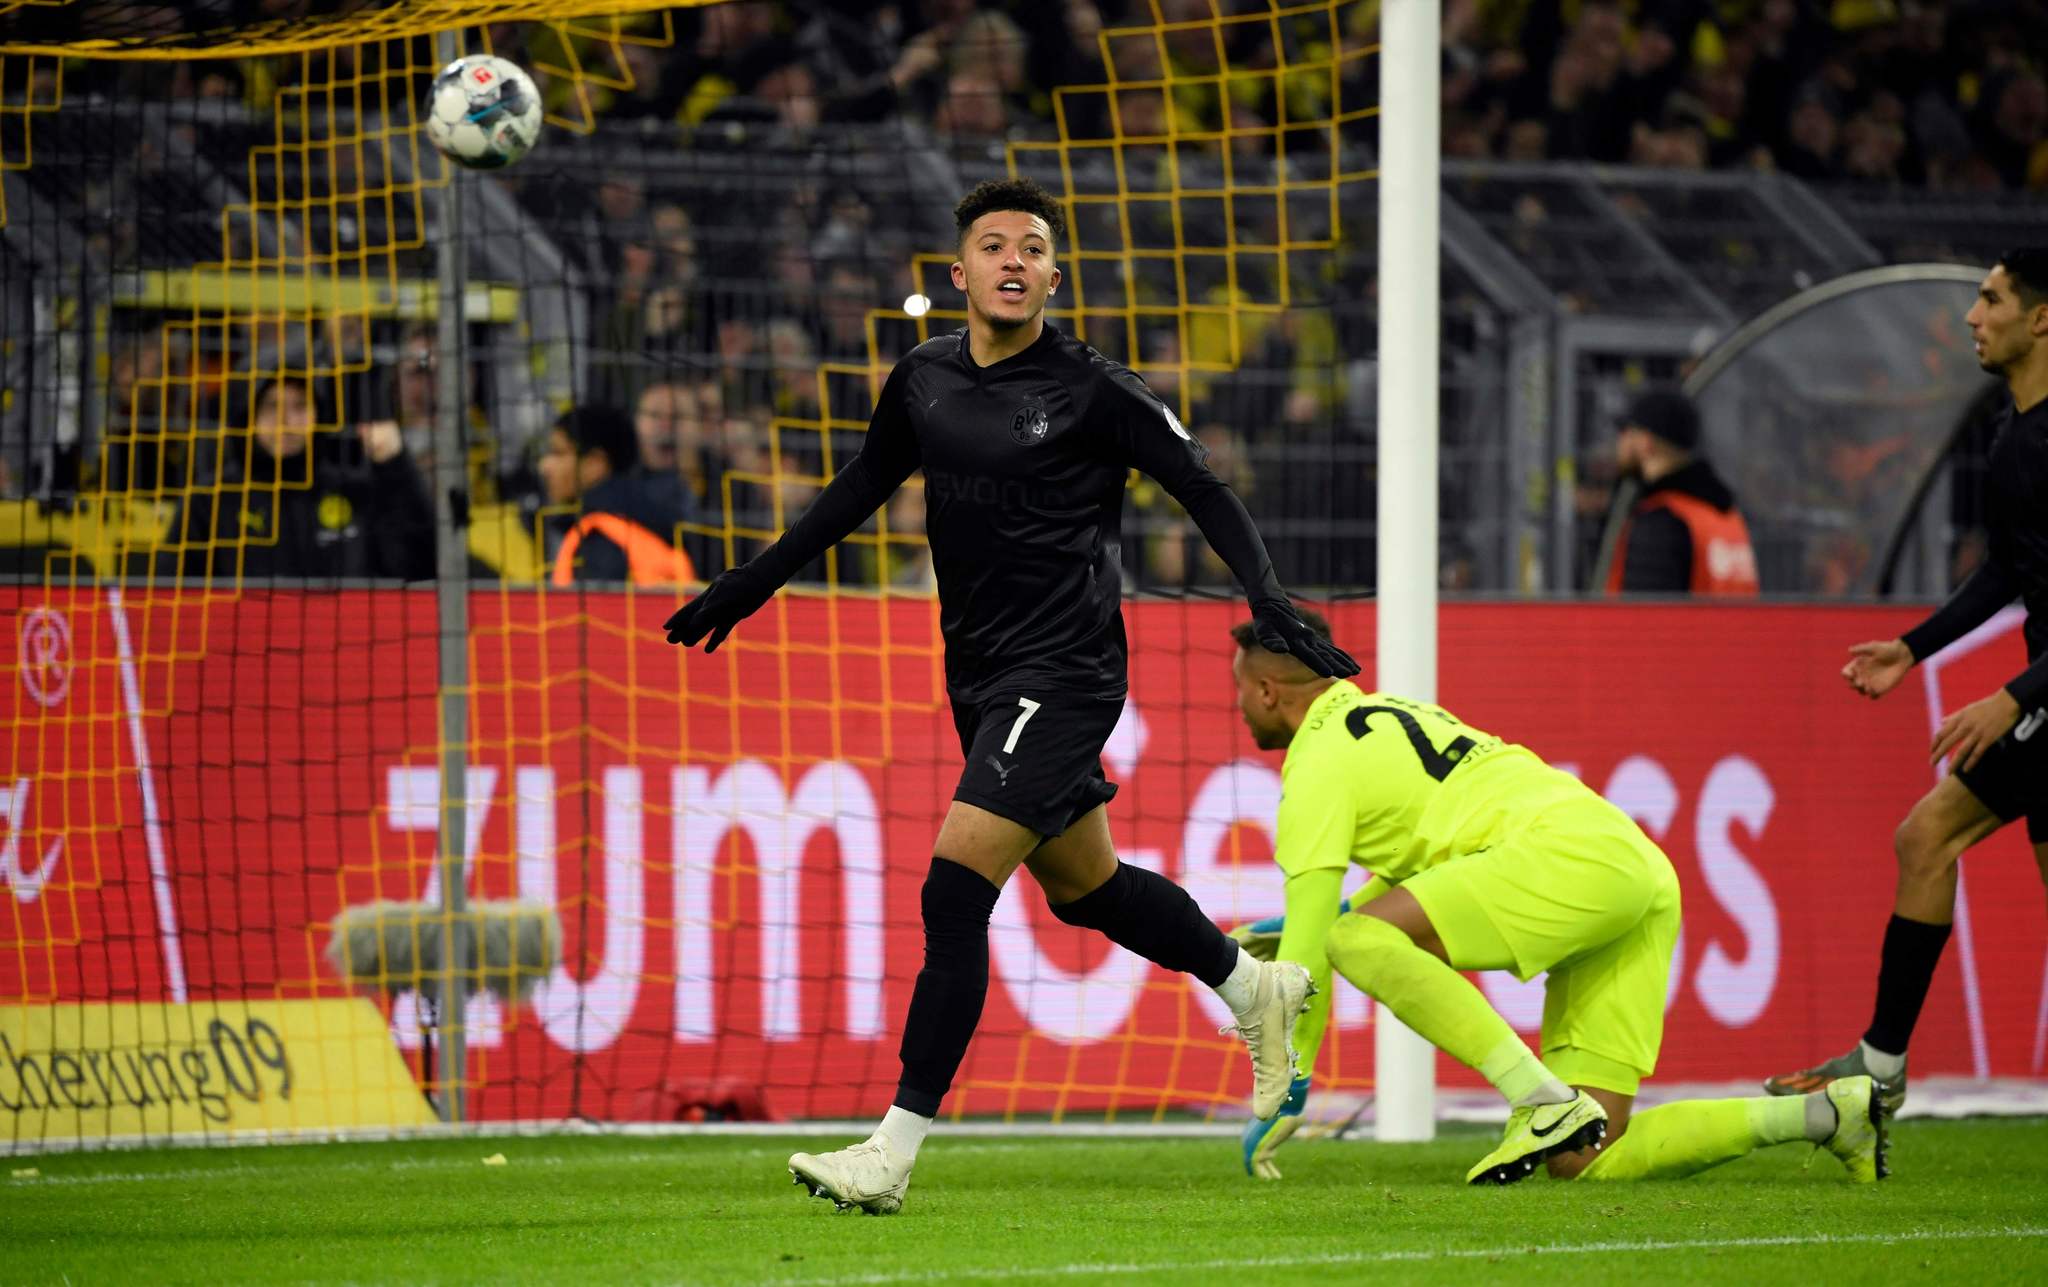 <HIT>Dortmund</HIT>s English forward Jadon Sancho celebrates a goal during the German first division Bundesliga football match Borussia <HIT>Dortmund</HIT> v Fortuna Dusseldorf in <HIT>Dortmund</HIT> on December 7, 2019. (Photo by INA FASSBENDER / AFP) / DFL REGULATIONS PROHIBIT ANY USE OF PHOTOGRAPHS AS IMAGE SEQUENCES AND/OR QUASI-VIDEO